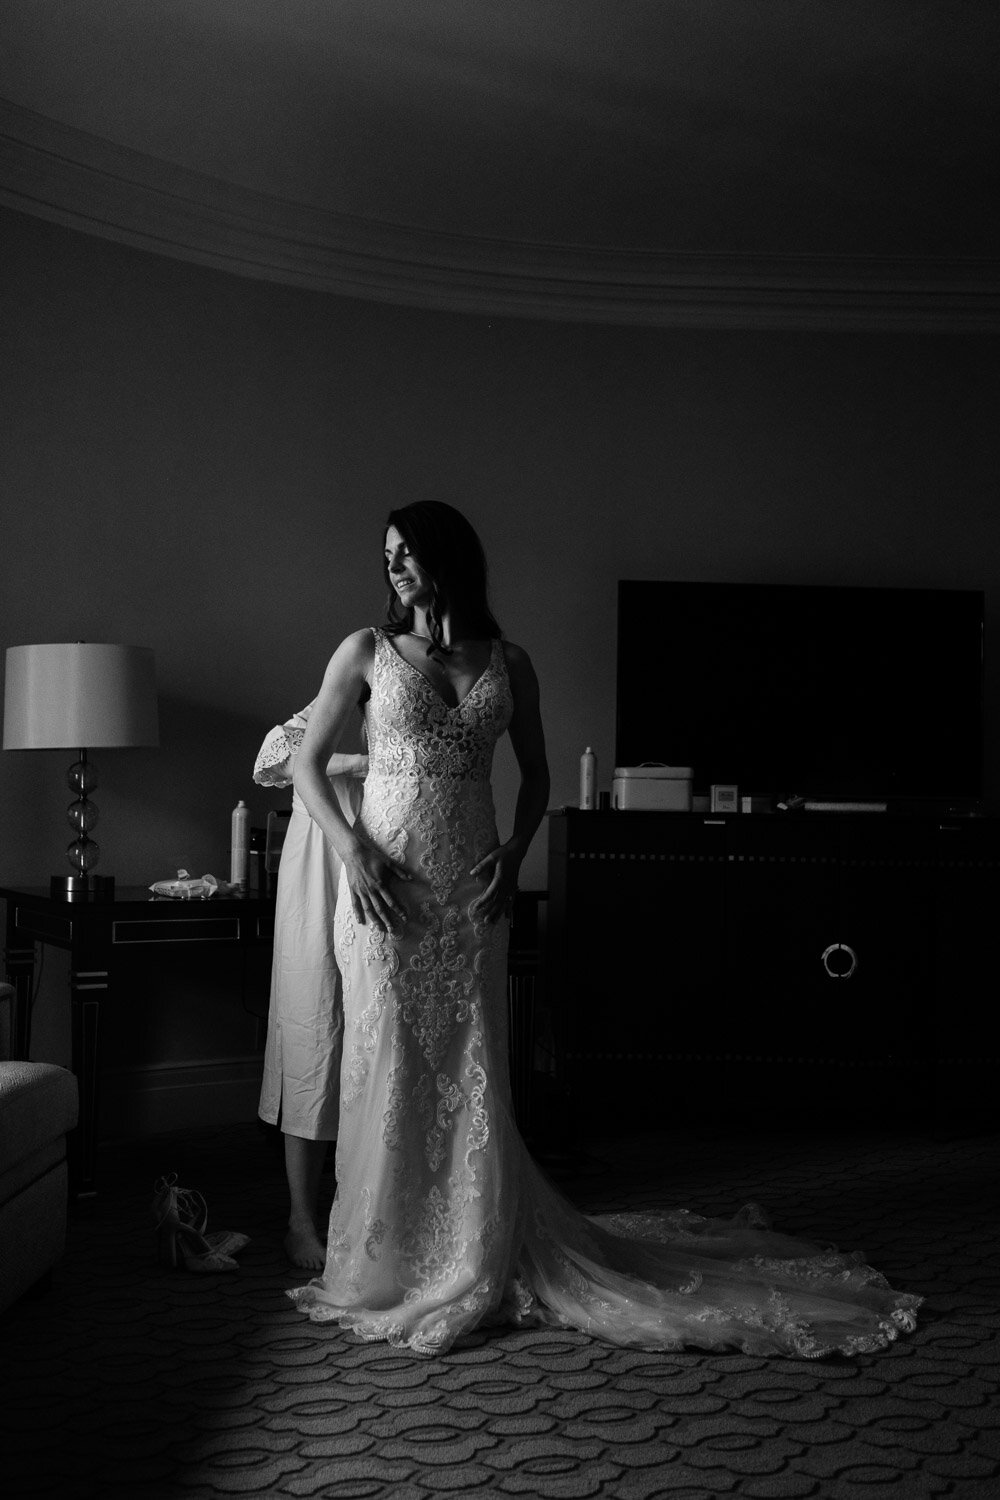 black and white photograph of a bride getting her wedding dress on